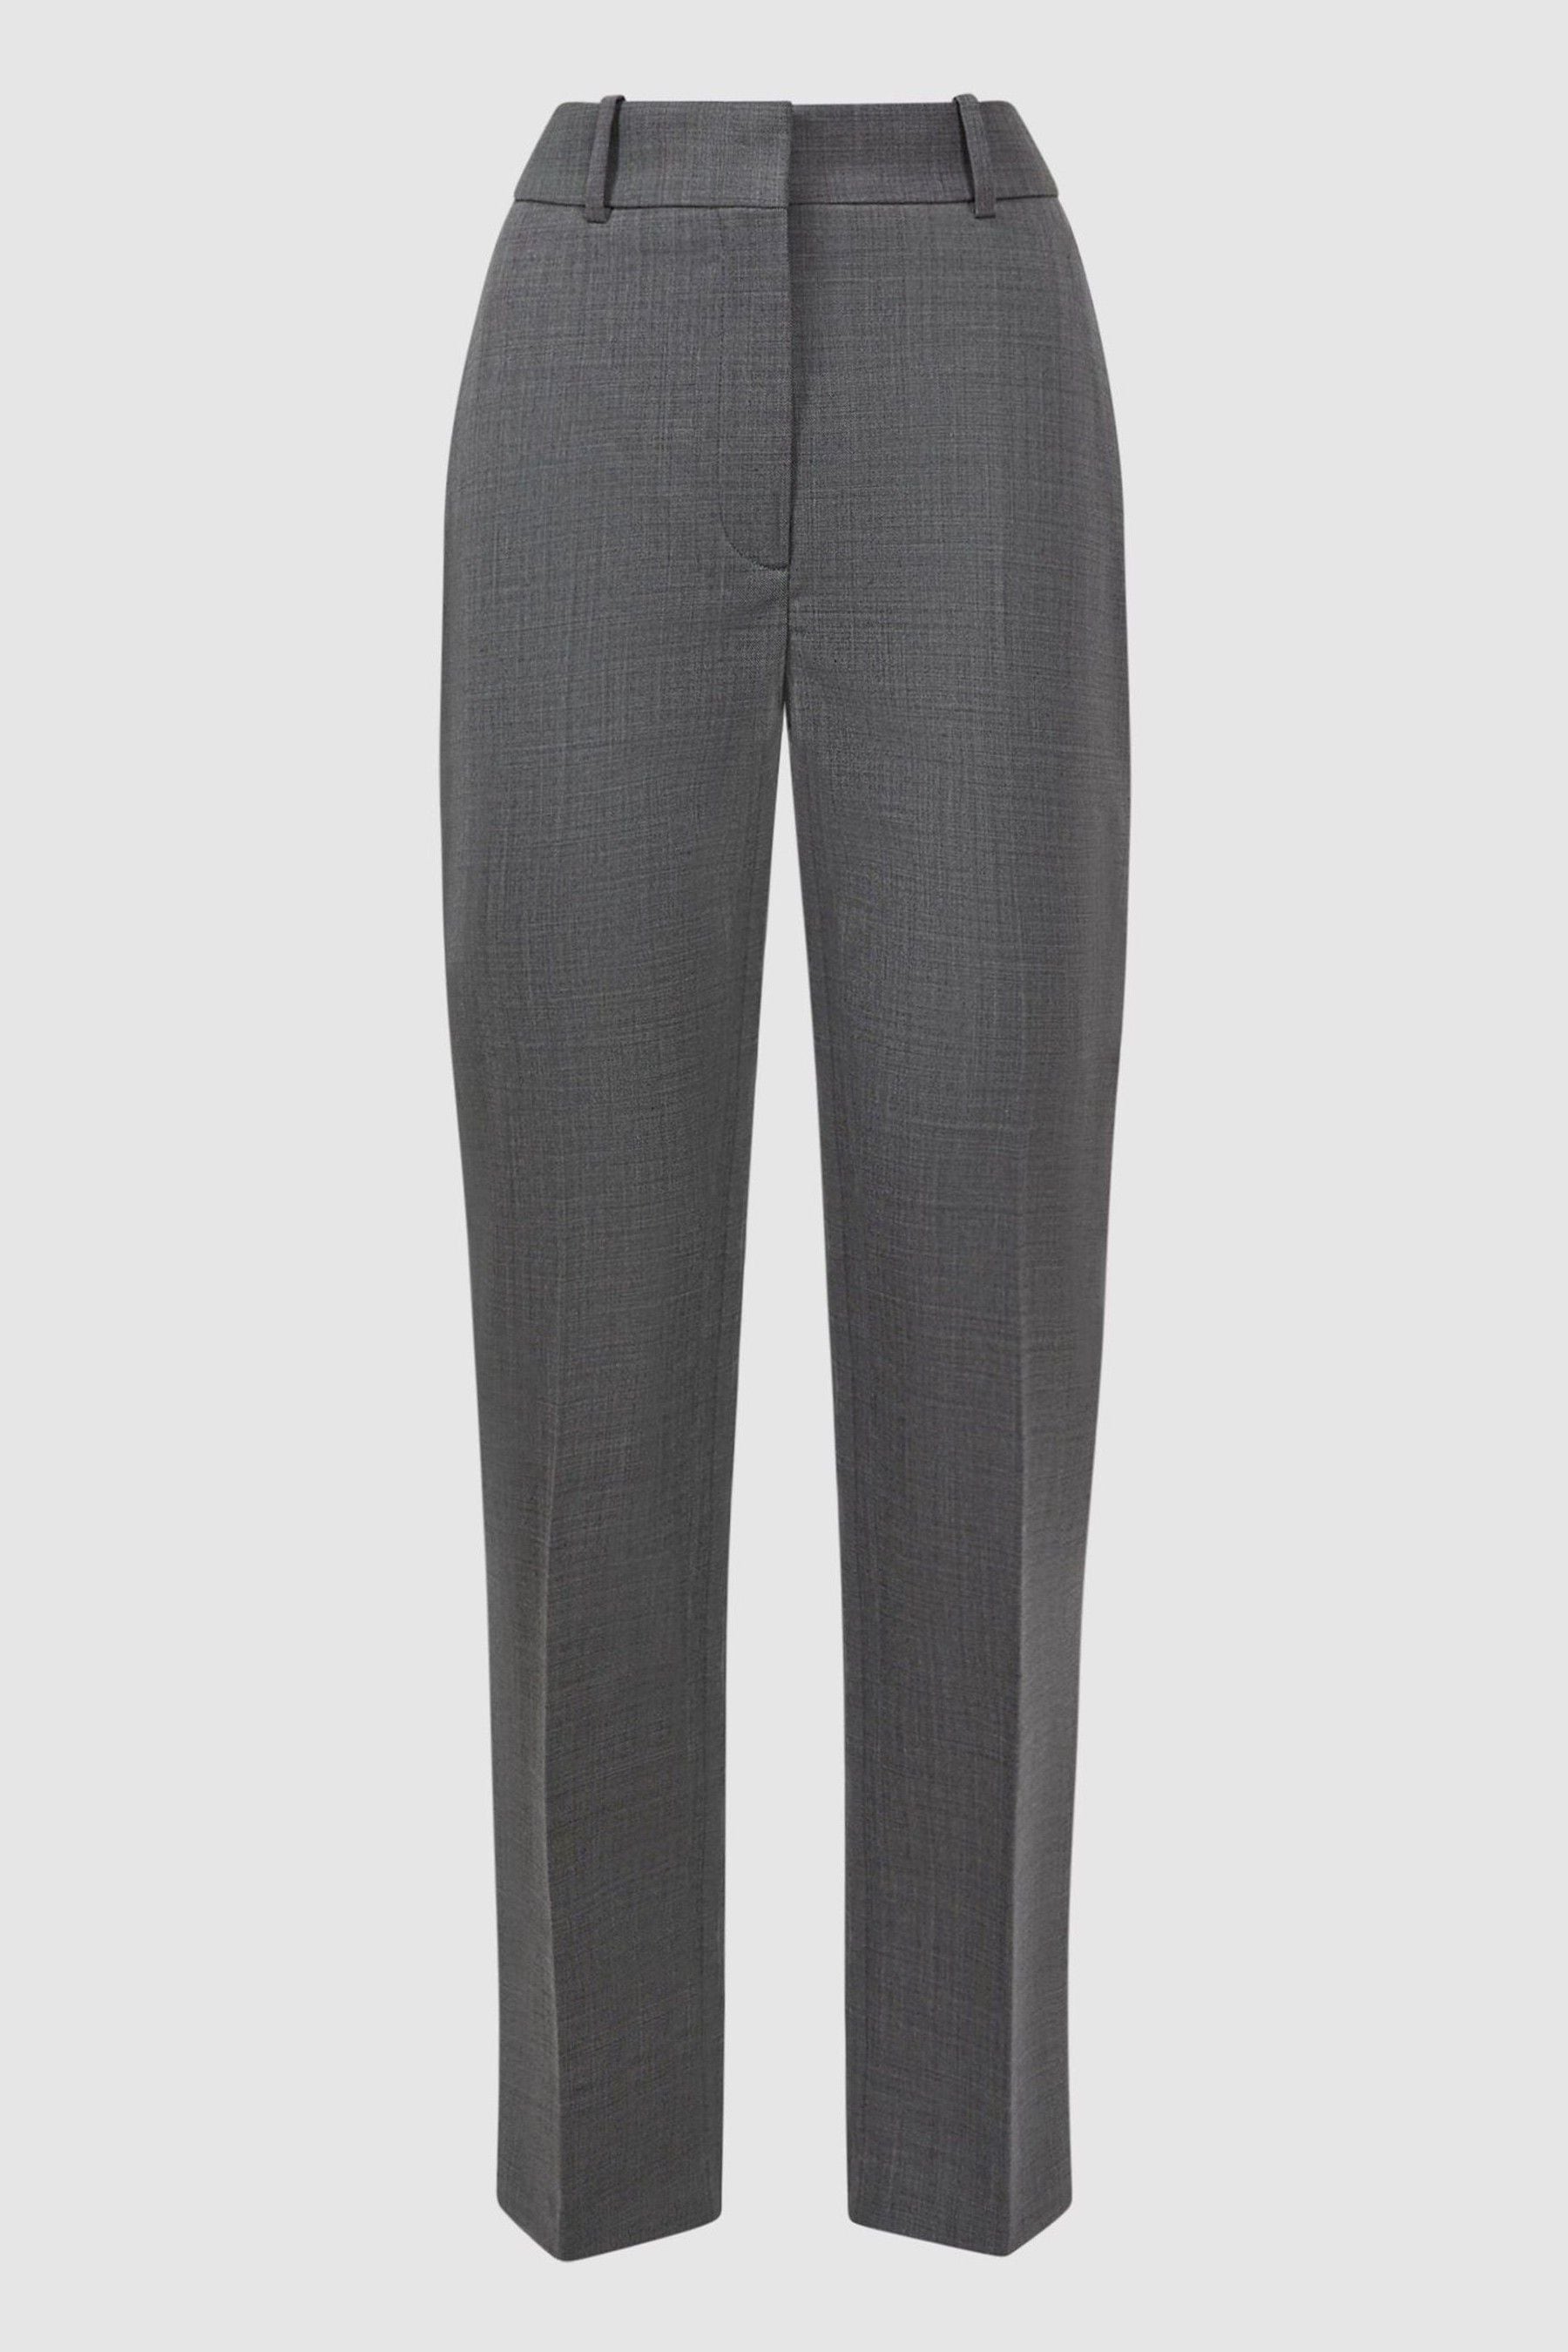 Buy Reiss Grey Layton Slim Fit Wool Blend Suit Trousers from the Next ...